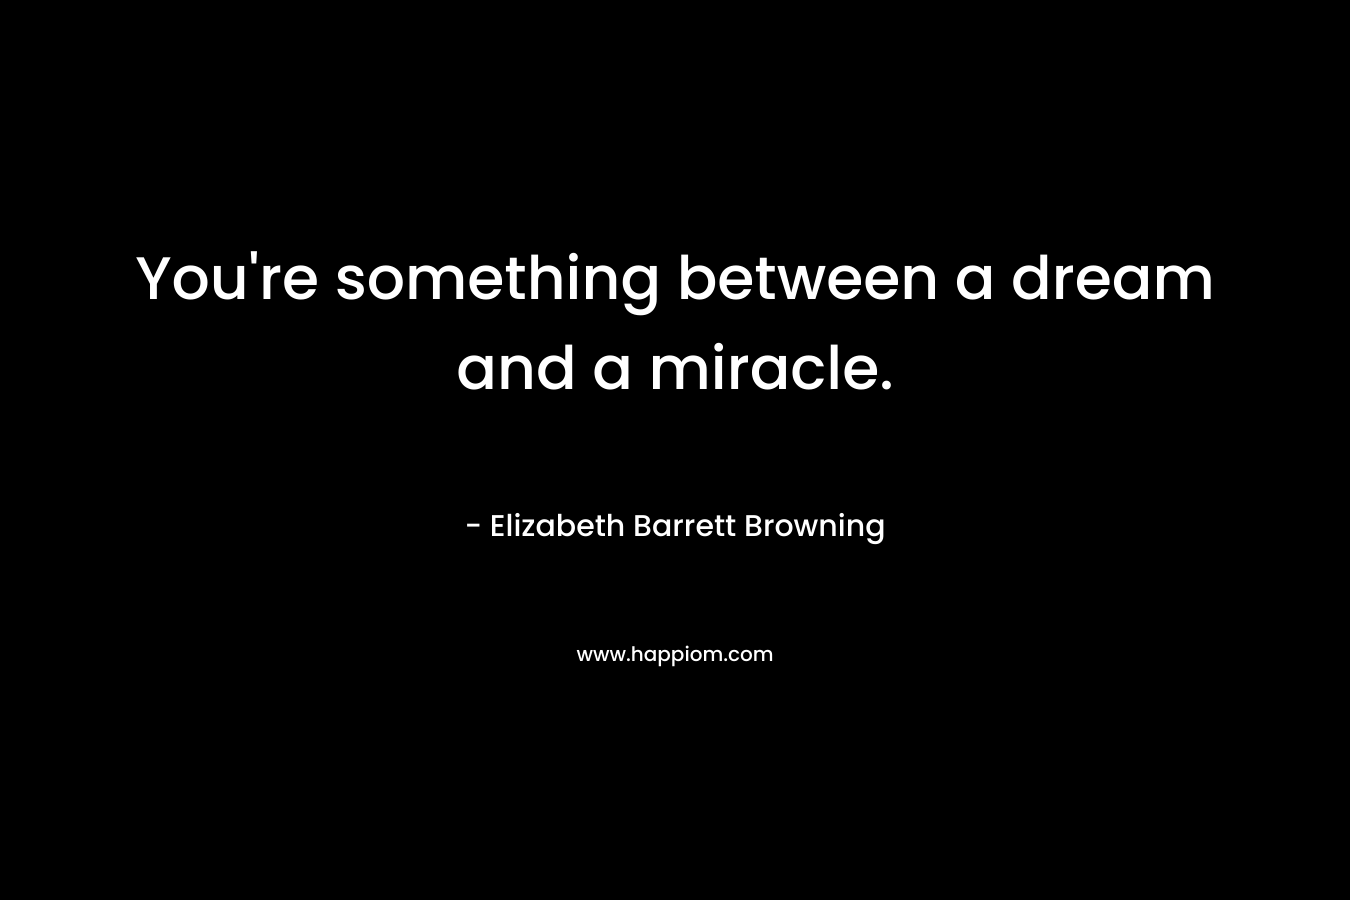 You’re something between a dream and a miracle. – Elizabeth Barrett Browning